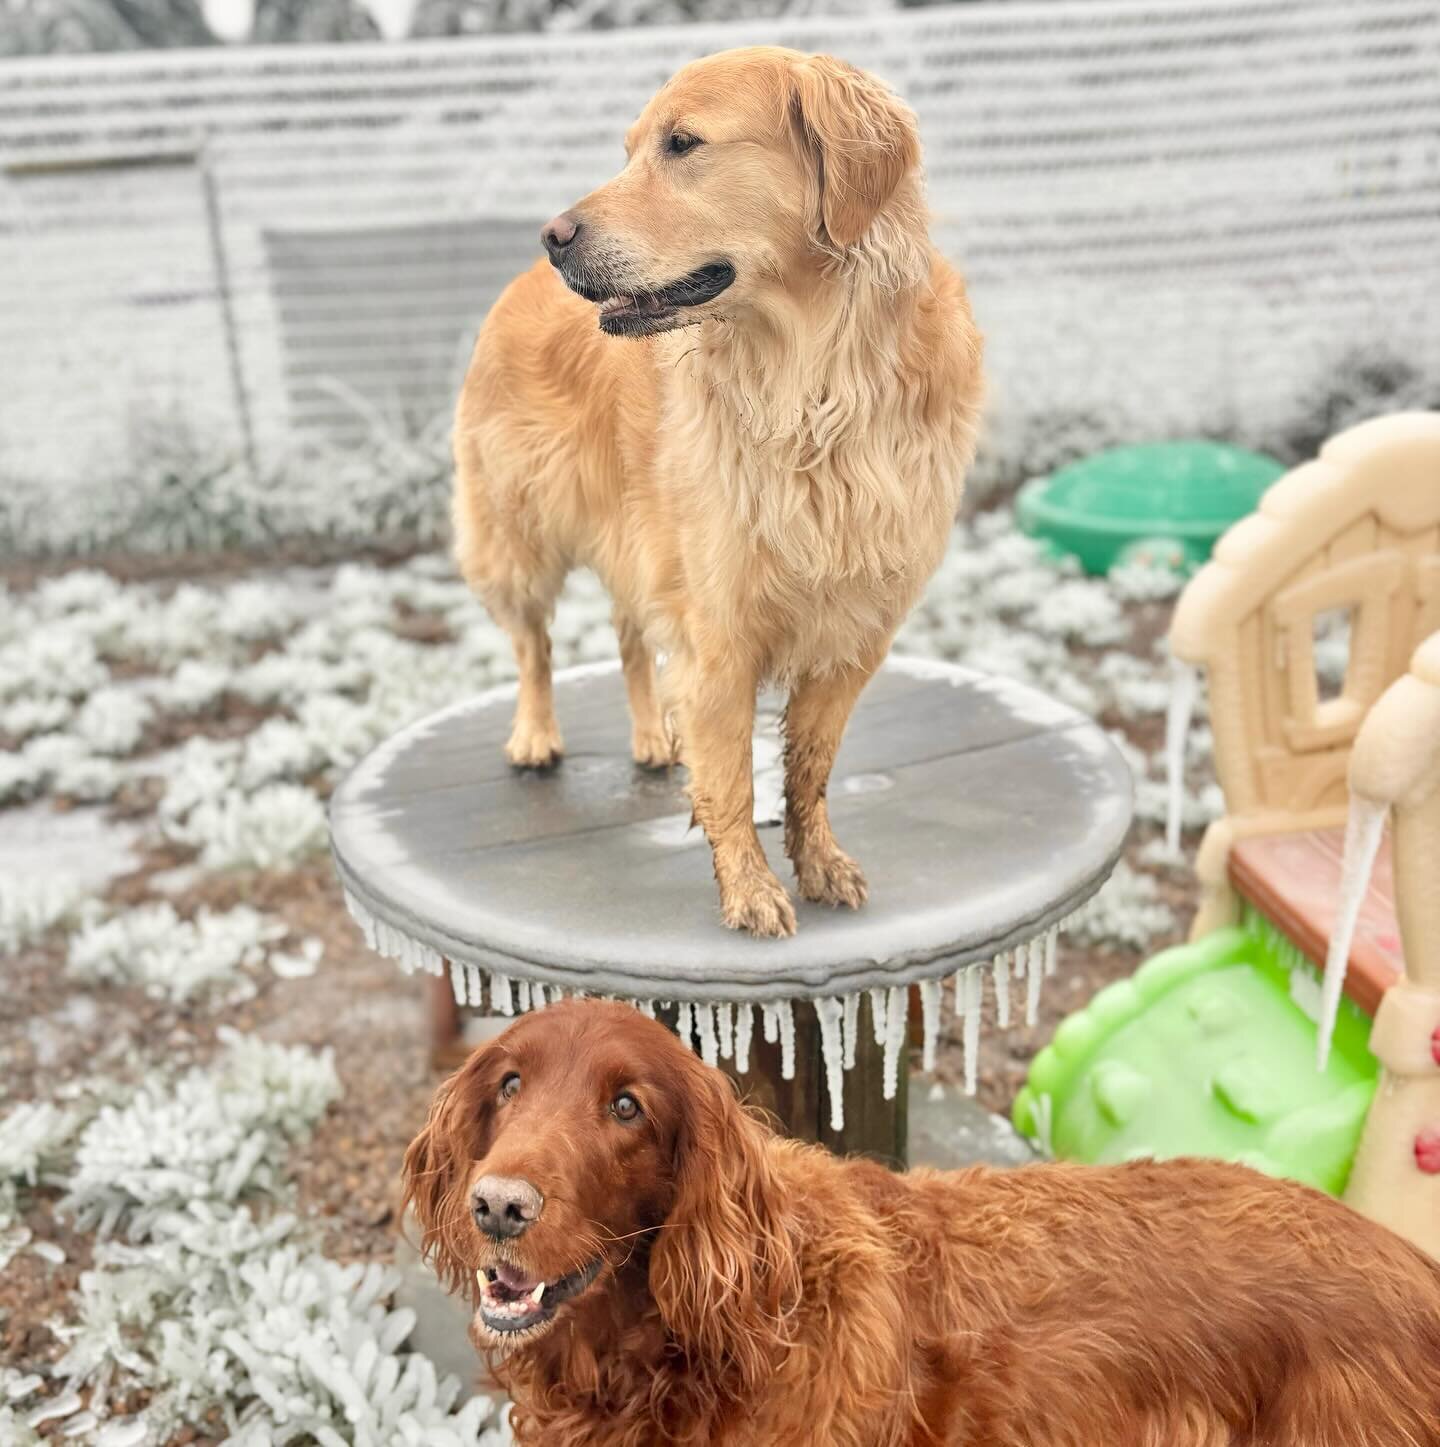 How is everyone holding up today??? Luckily the dogs don&rsquo;t seem to share our feelings of inconvenience about the weather, they think the ice is ❄️the best thing❄️! We hope all of your dogs are just as &ldquo;oblivious&rdquo; as ours 😉 

Stay w